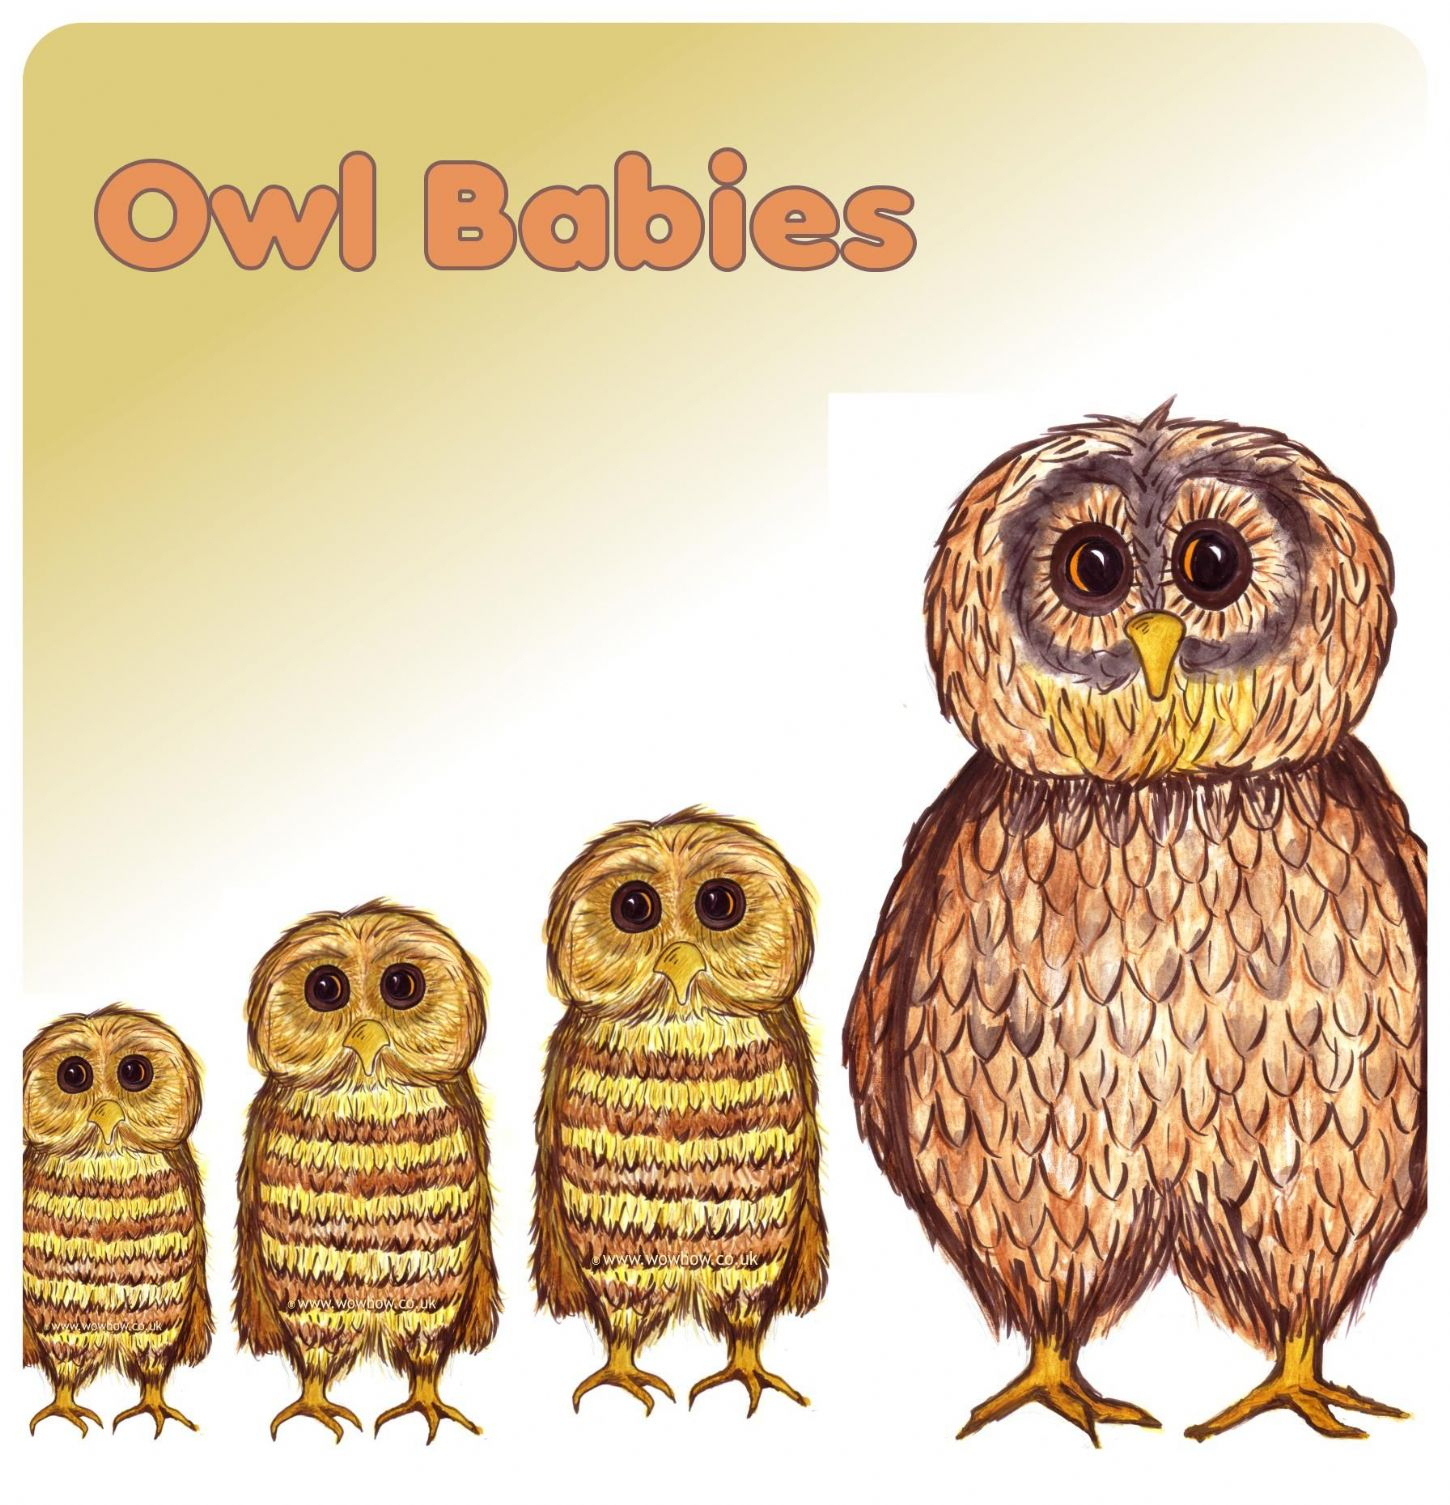 Baby Owl Dot To Dot Printable Worksheet - Connect The Dots | Owl Babies ...